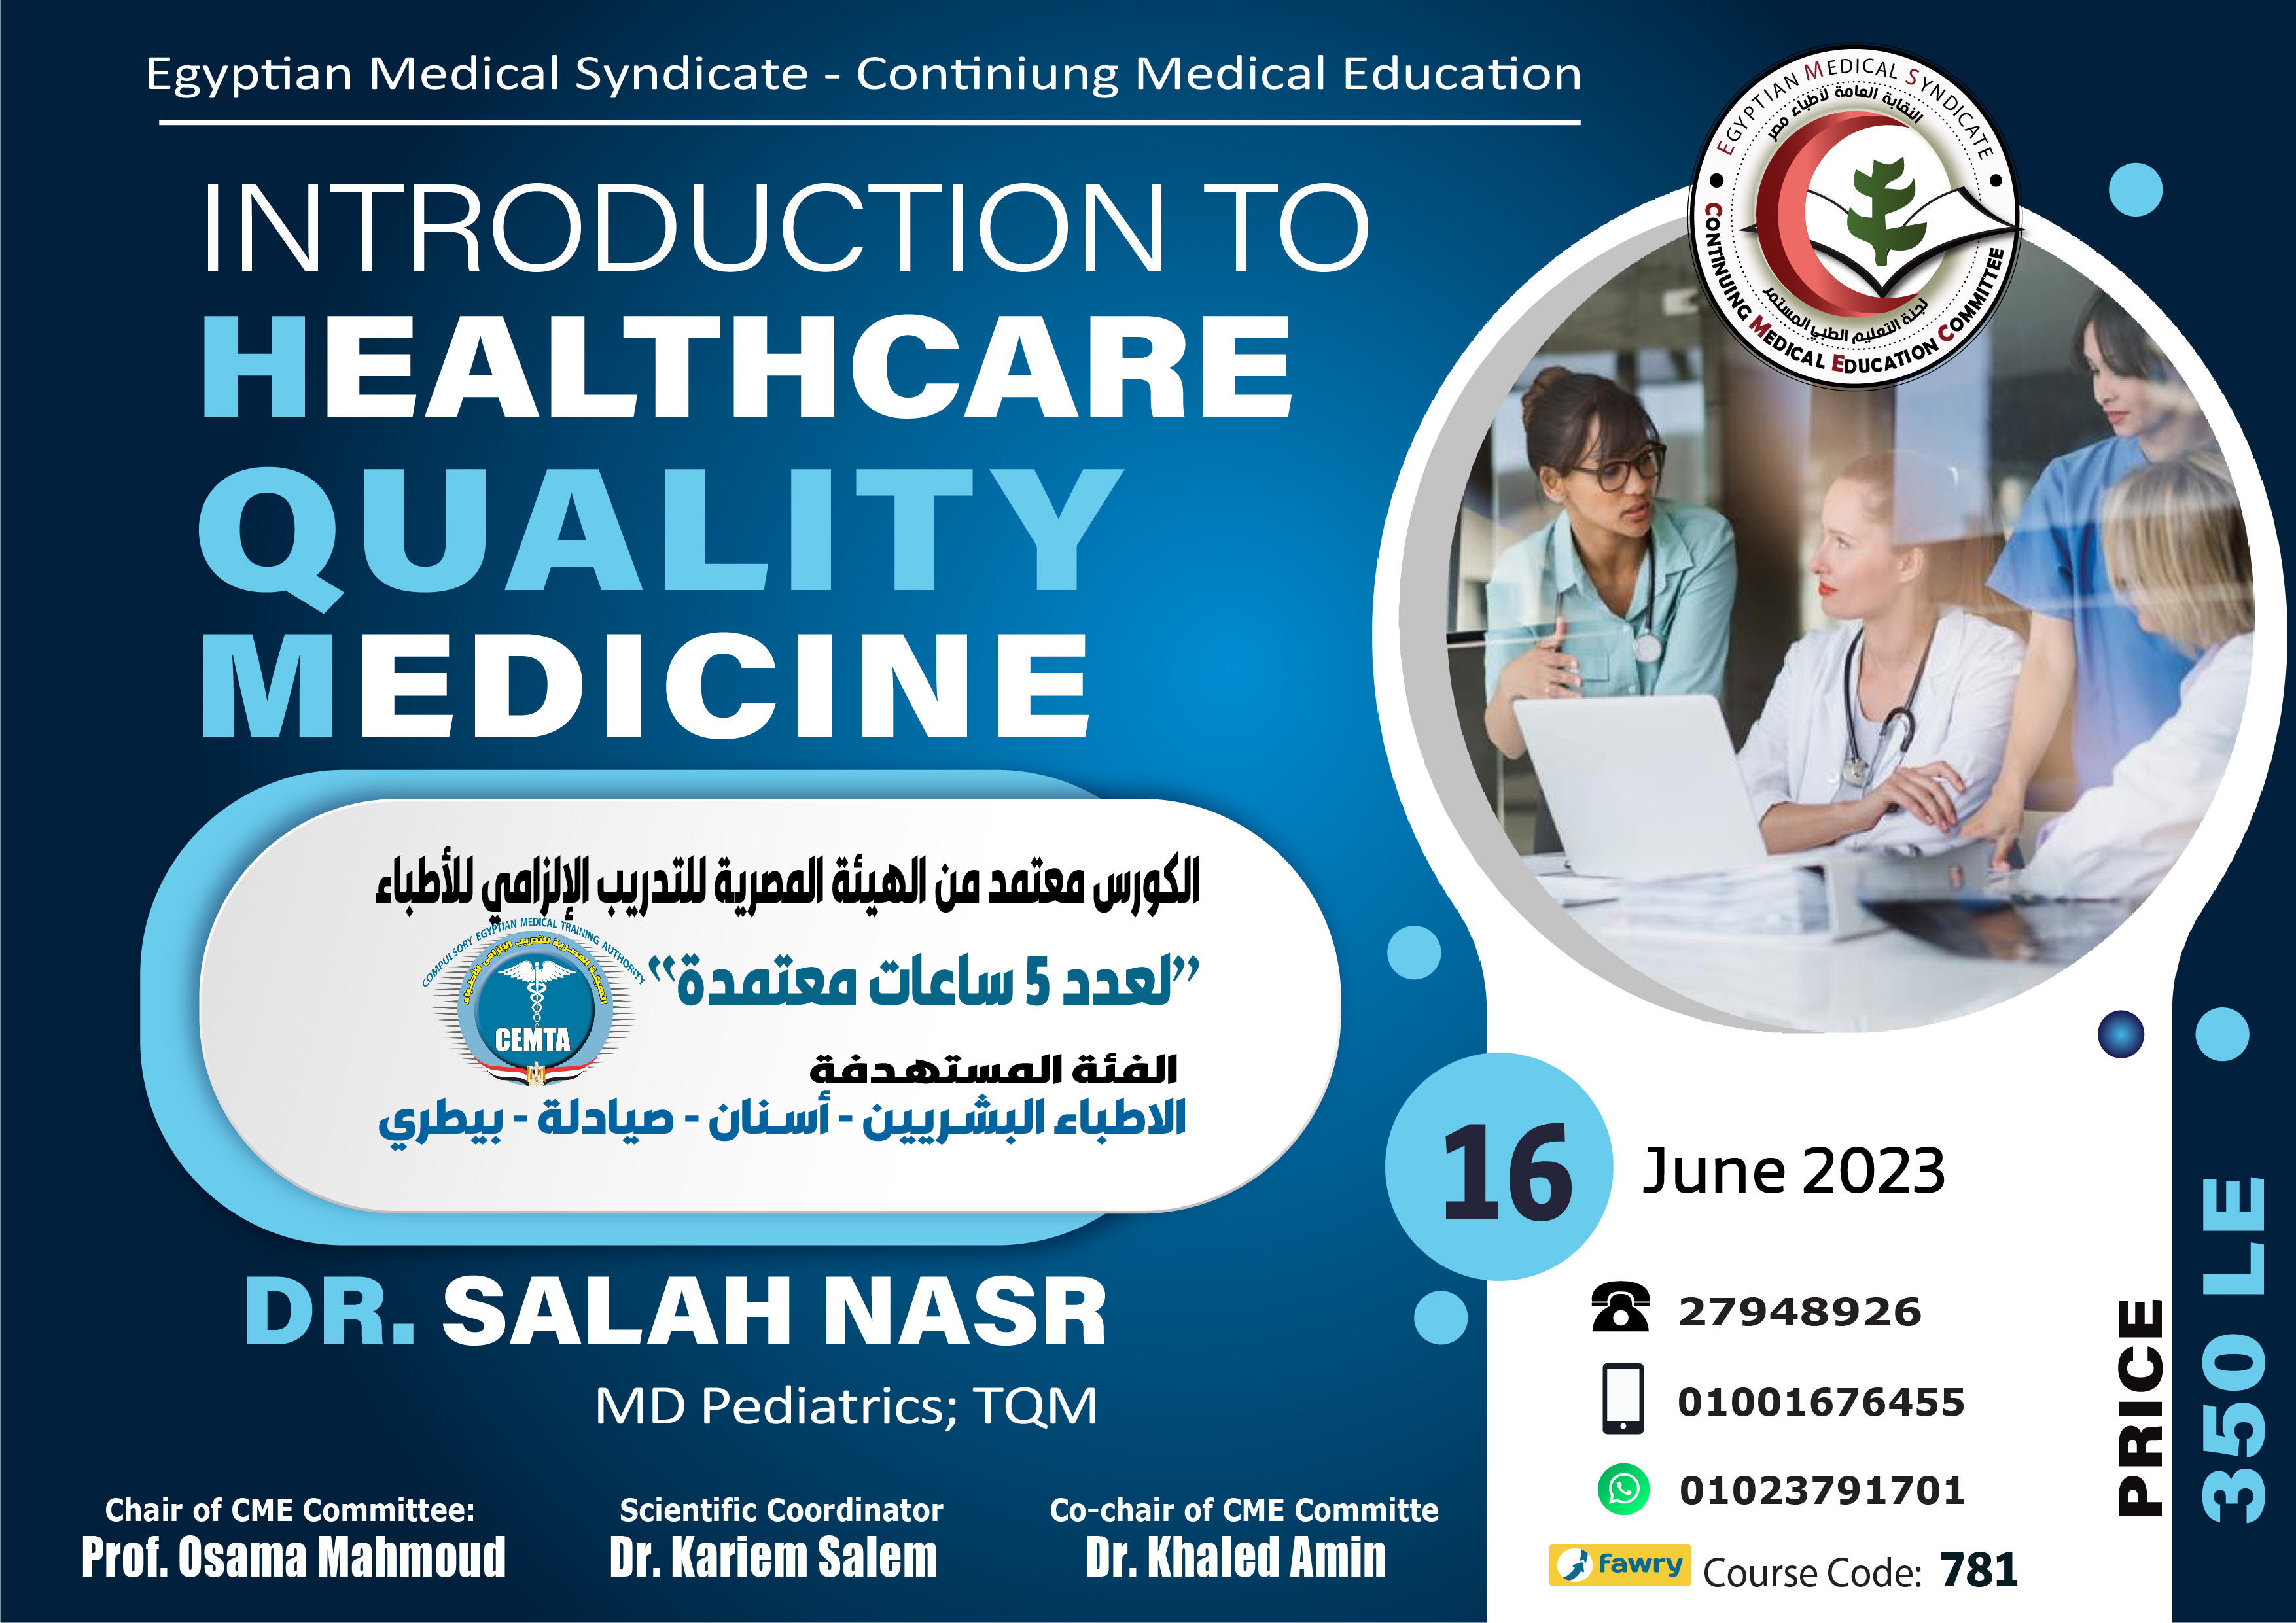 Introduction to Healthcare Quality Medicine